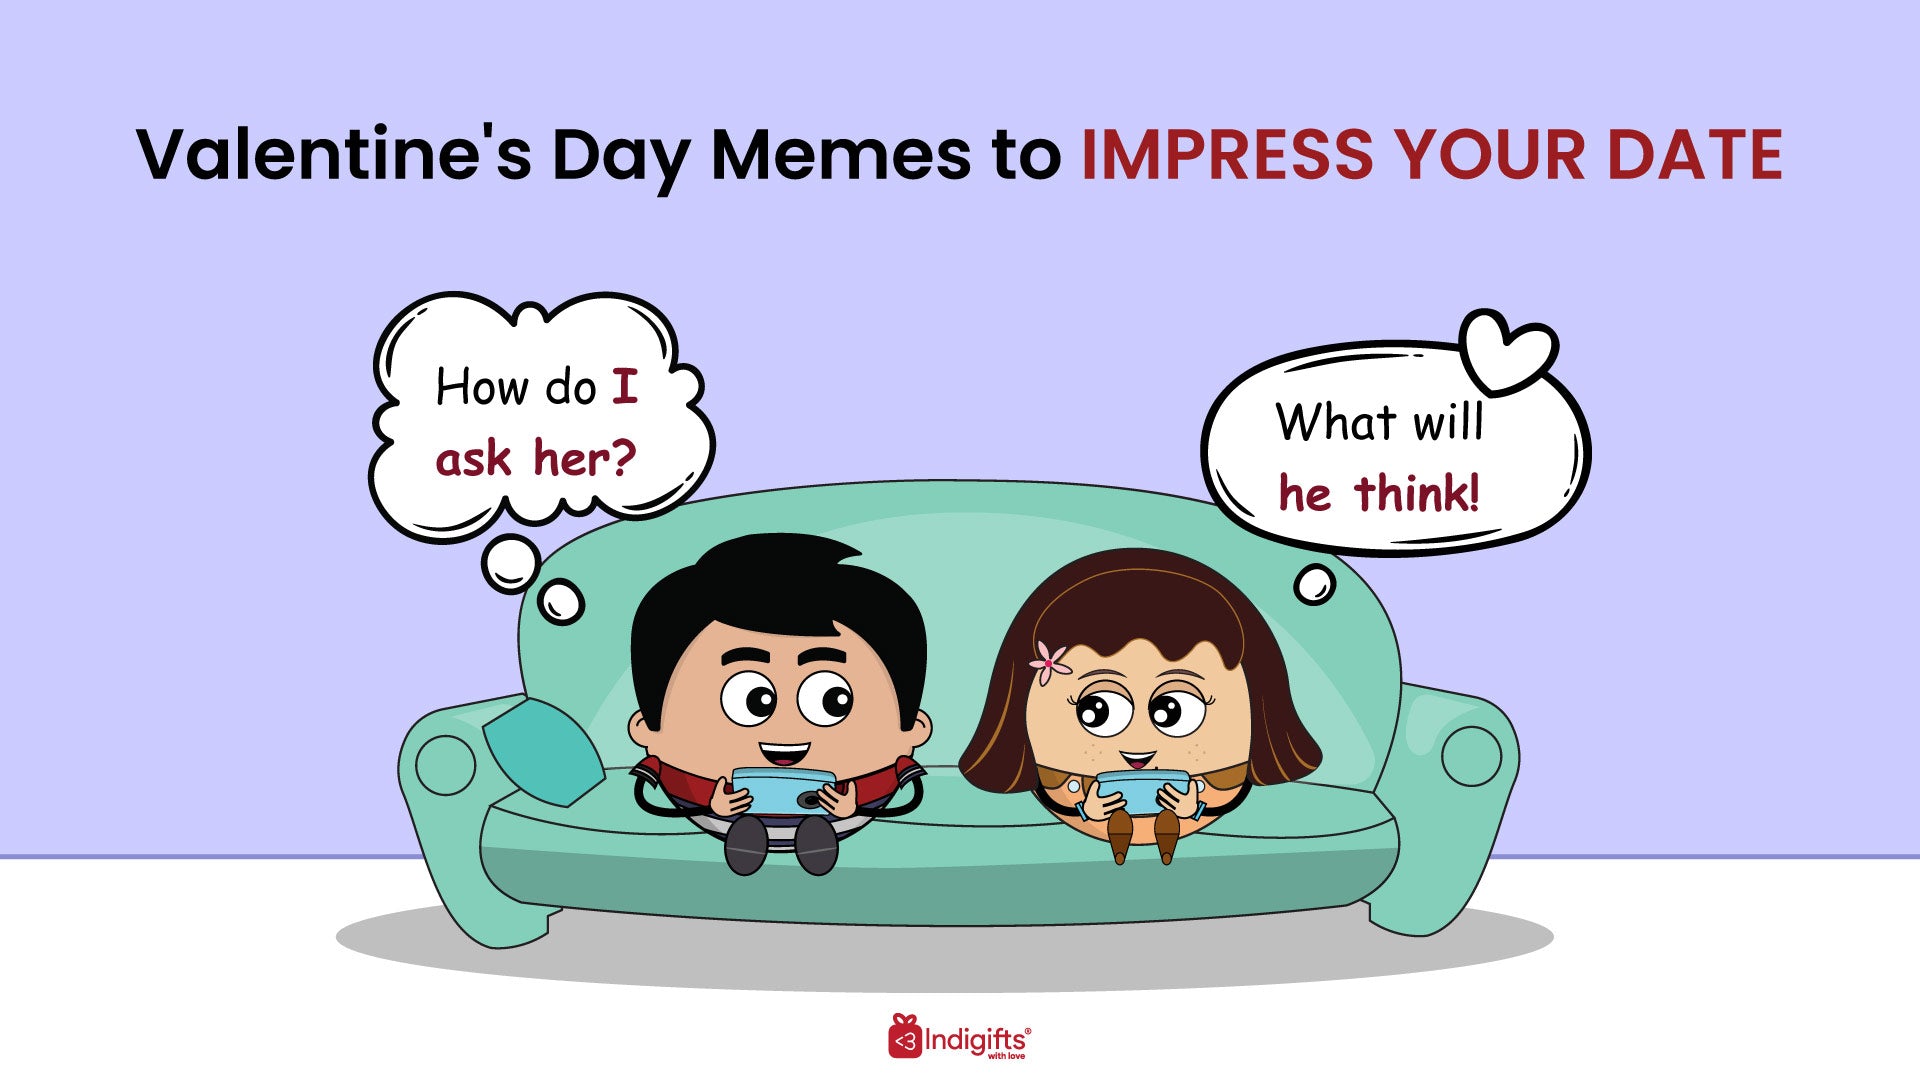 Funny Memes for Valentine’s Day